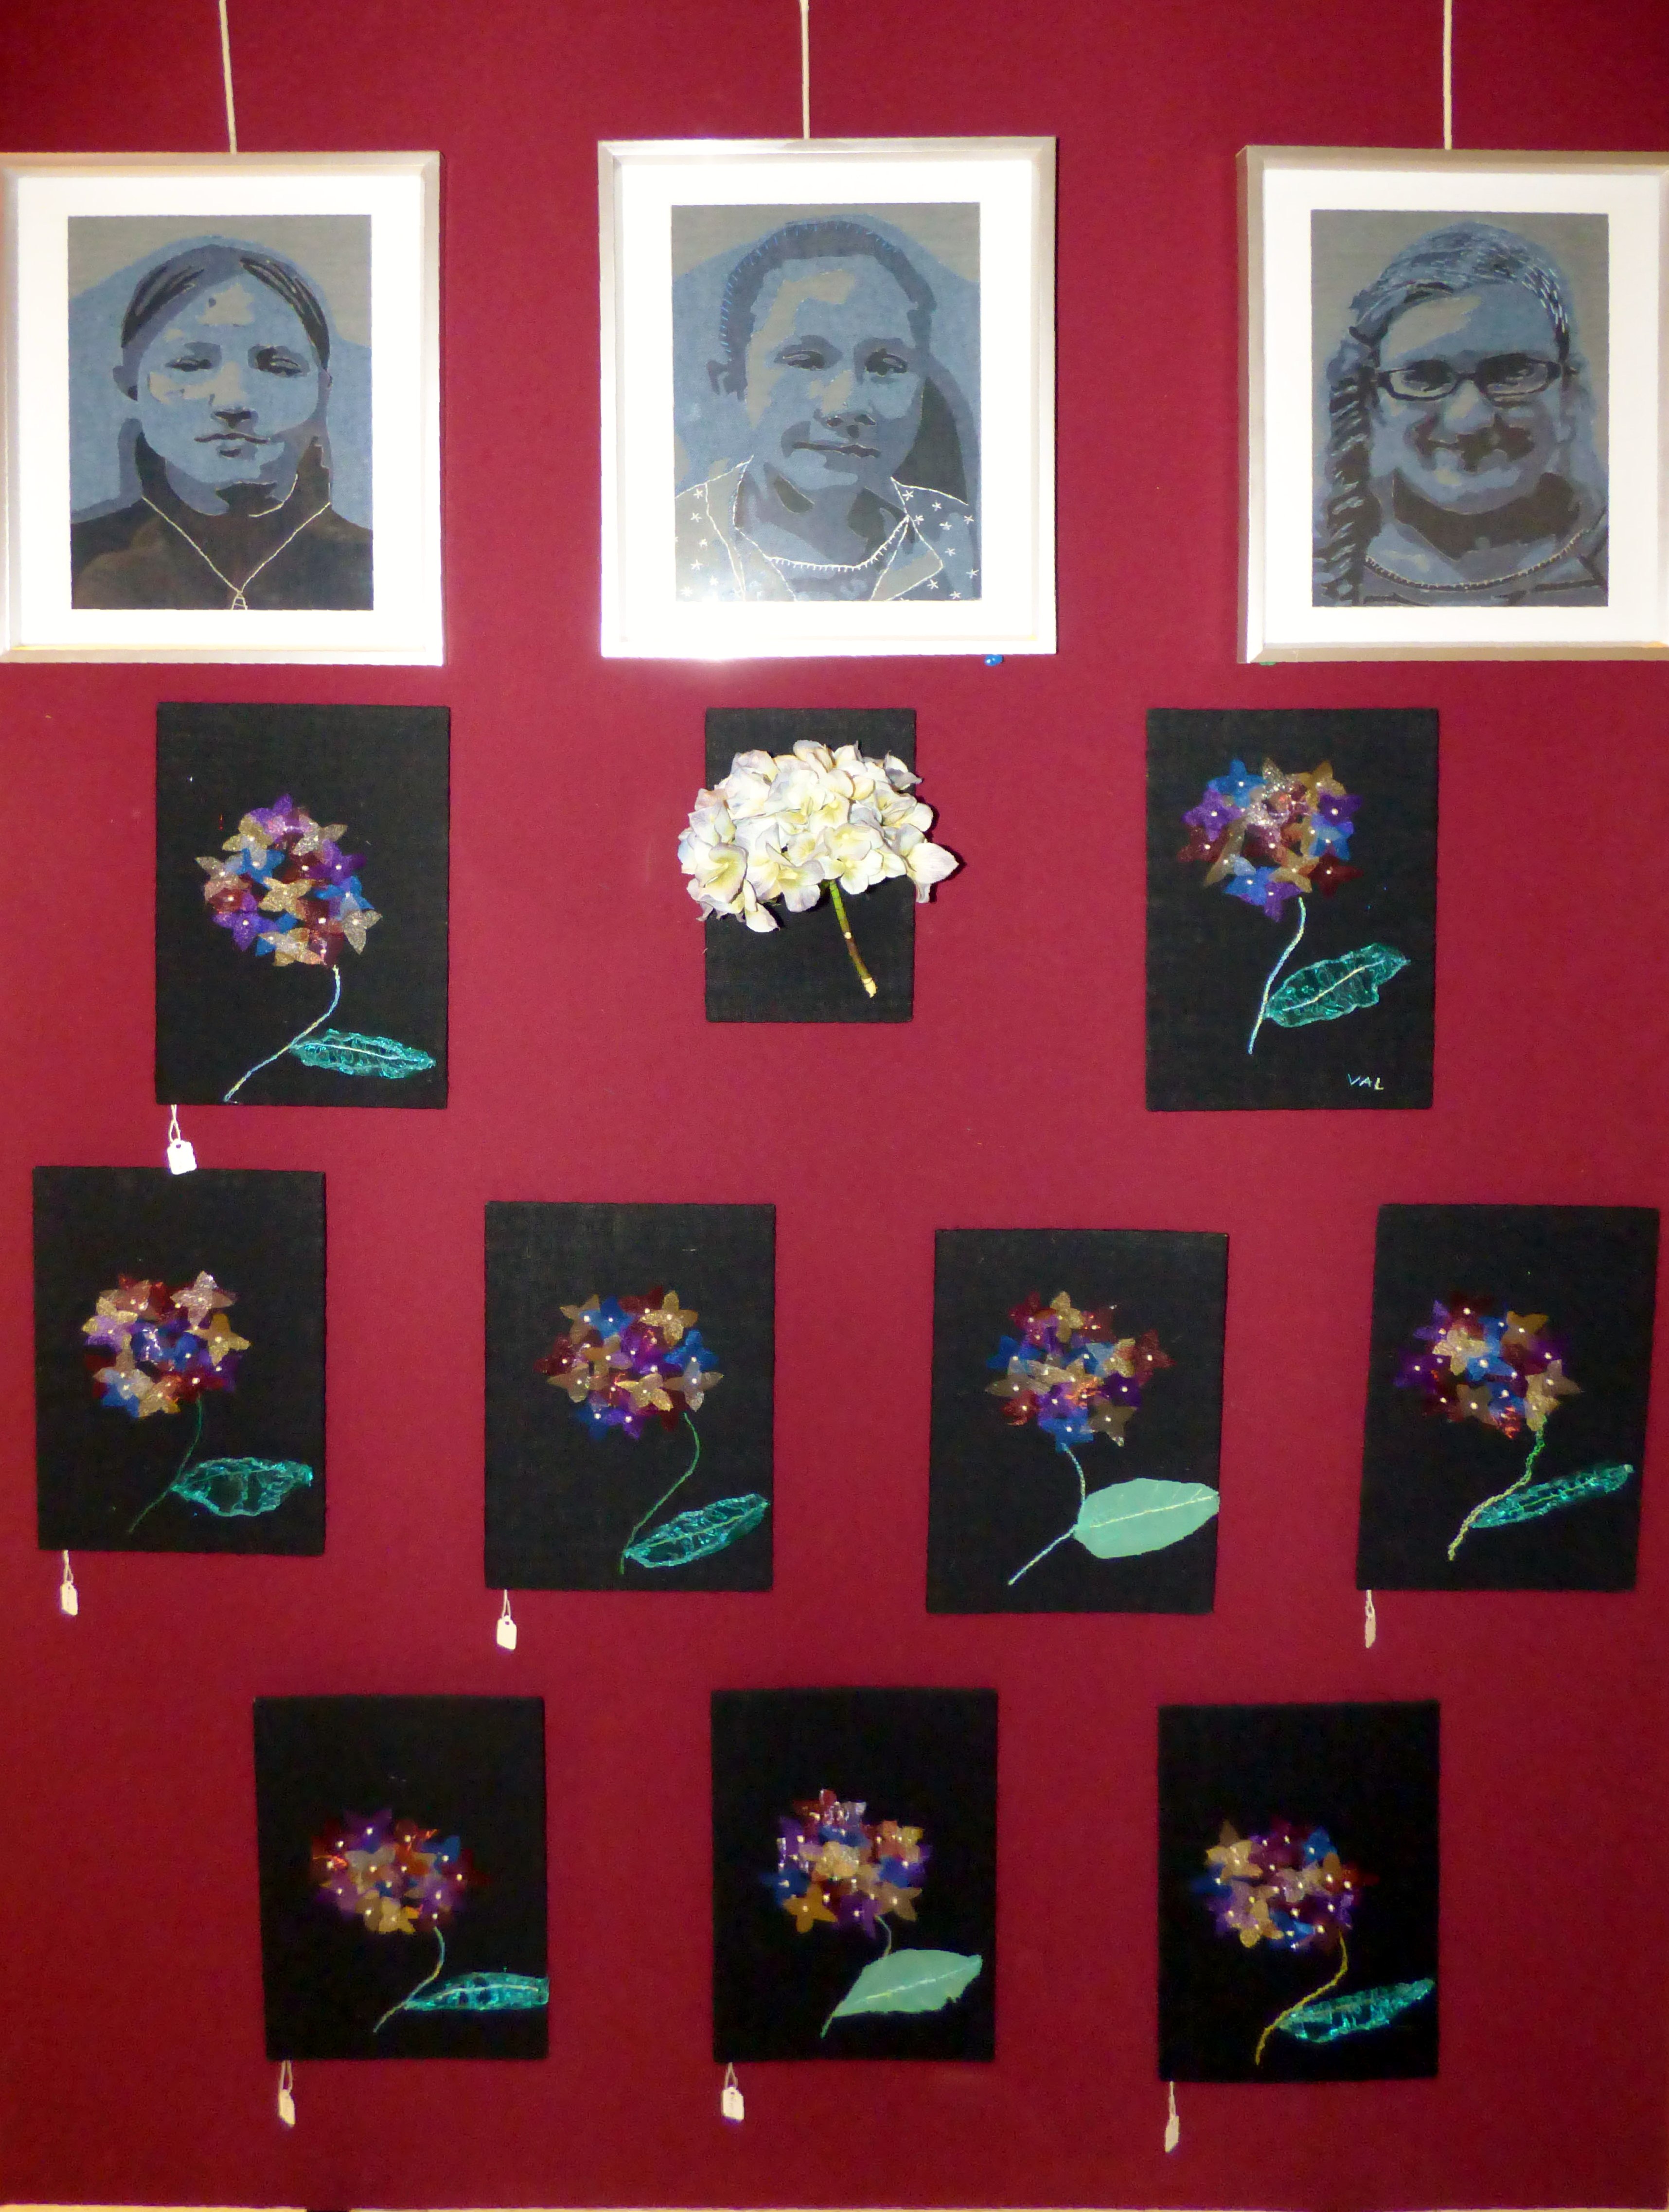 SELF PORTRAITS and HYDRANGEAS by Merseyside Young Embroiderers at 60 Glorious Years exhibition, Liverpool Anglican Cathedral 2016